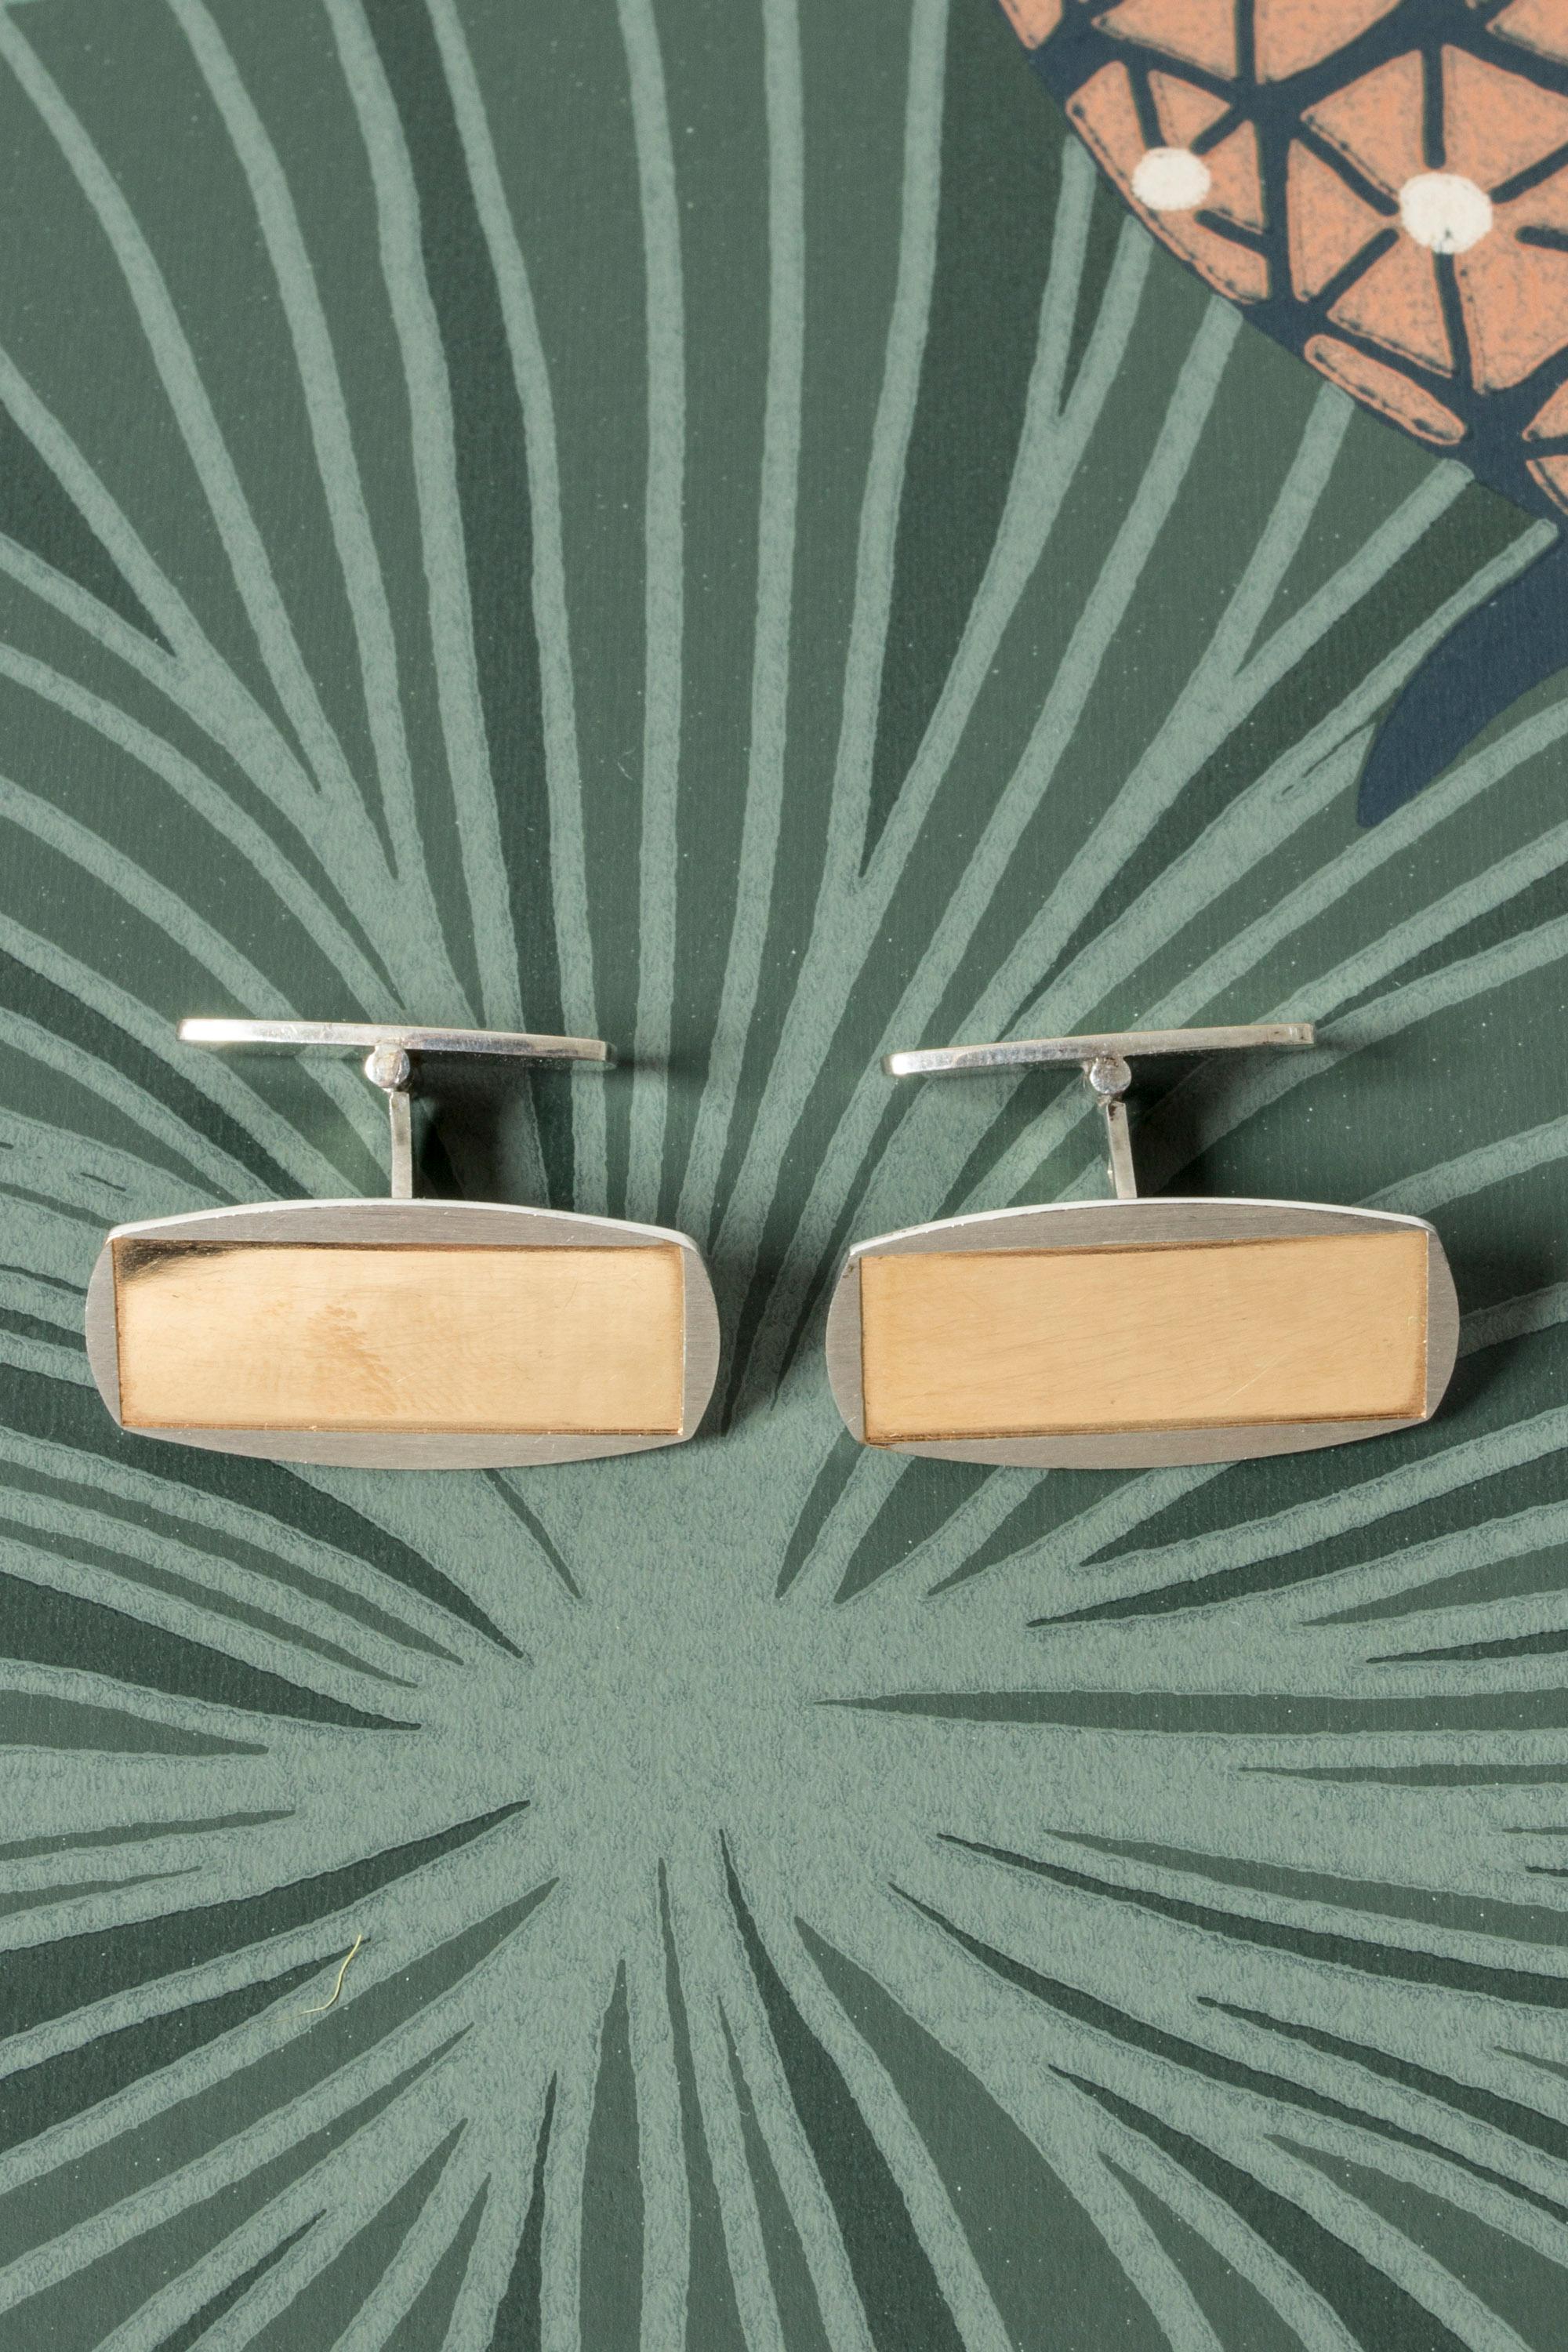 Pair of silver cufflinks from Alton, with a smooth, gilded surface. Elegant, sleek design.
